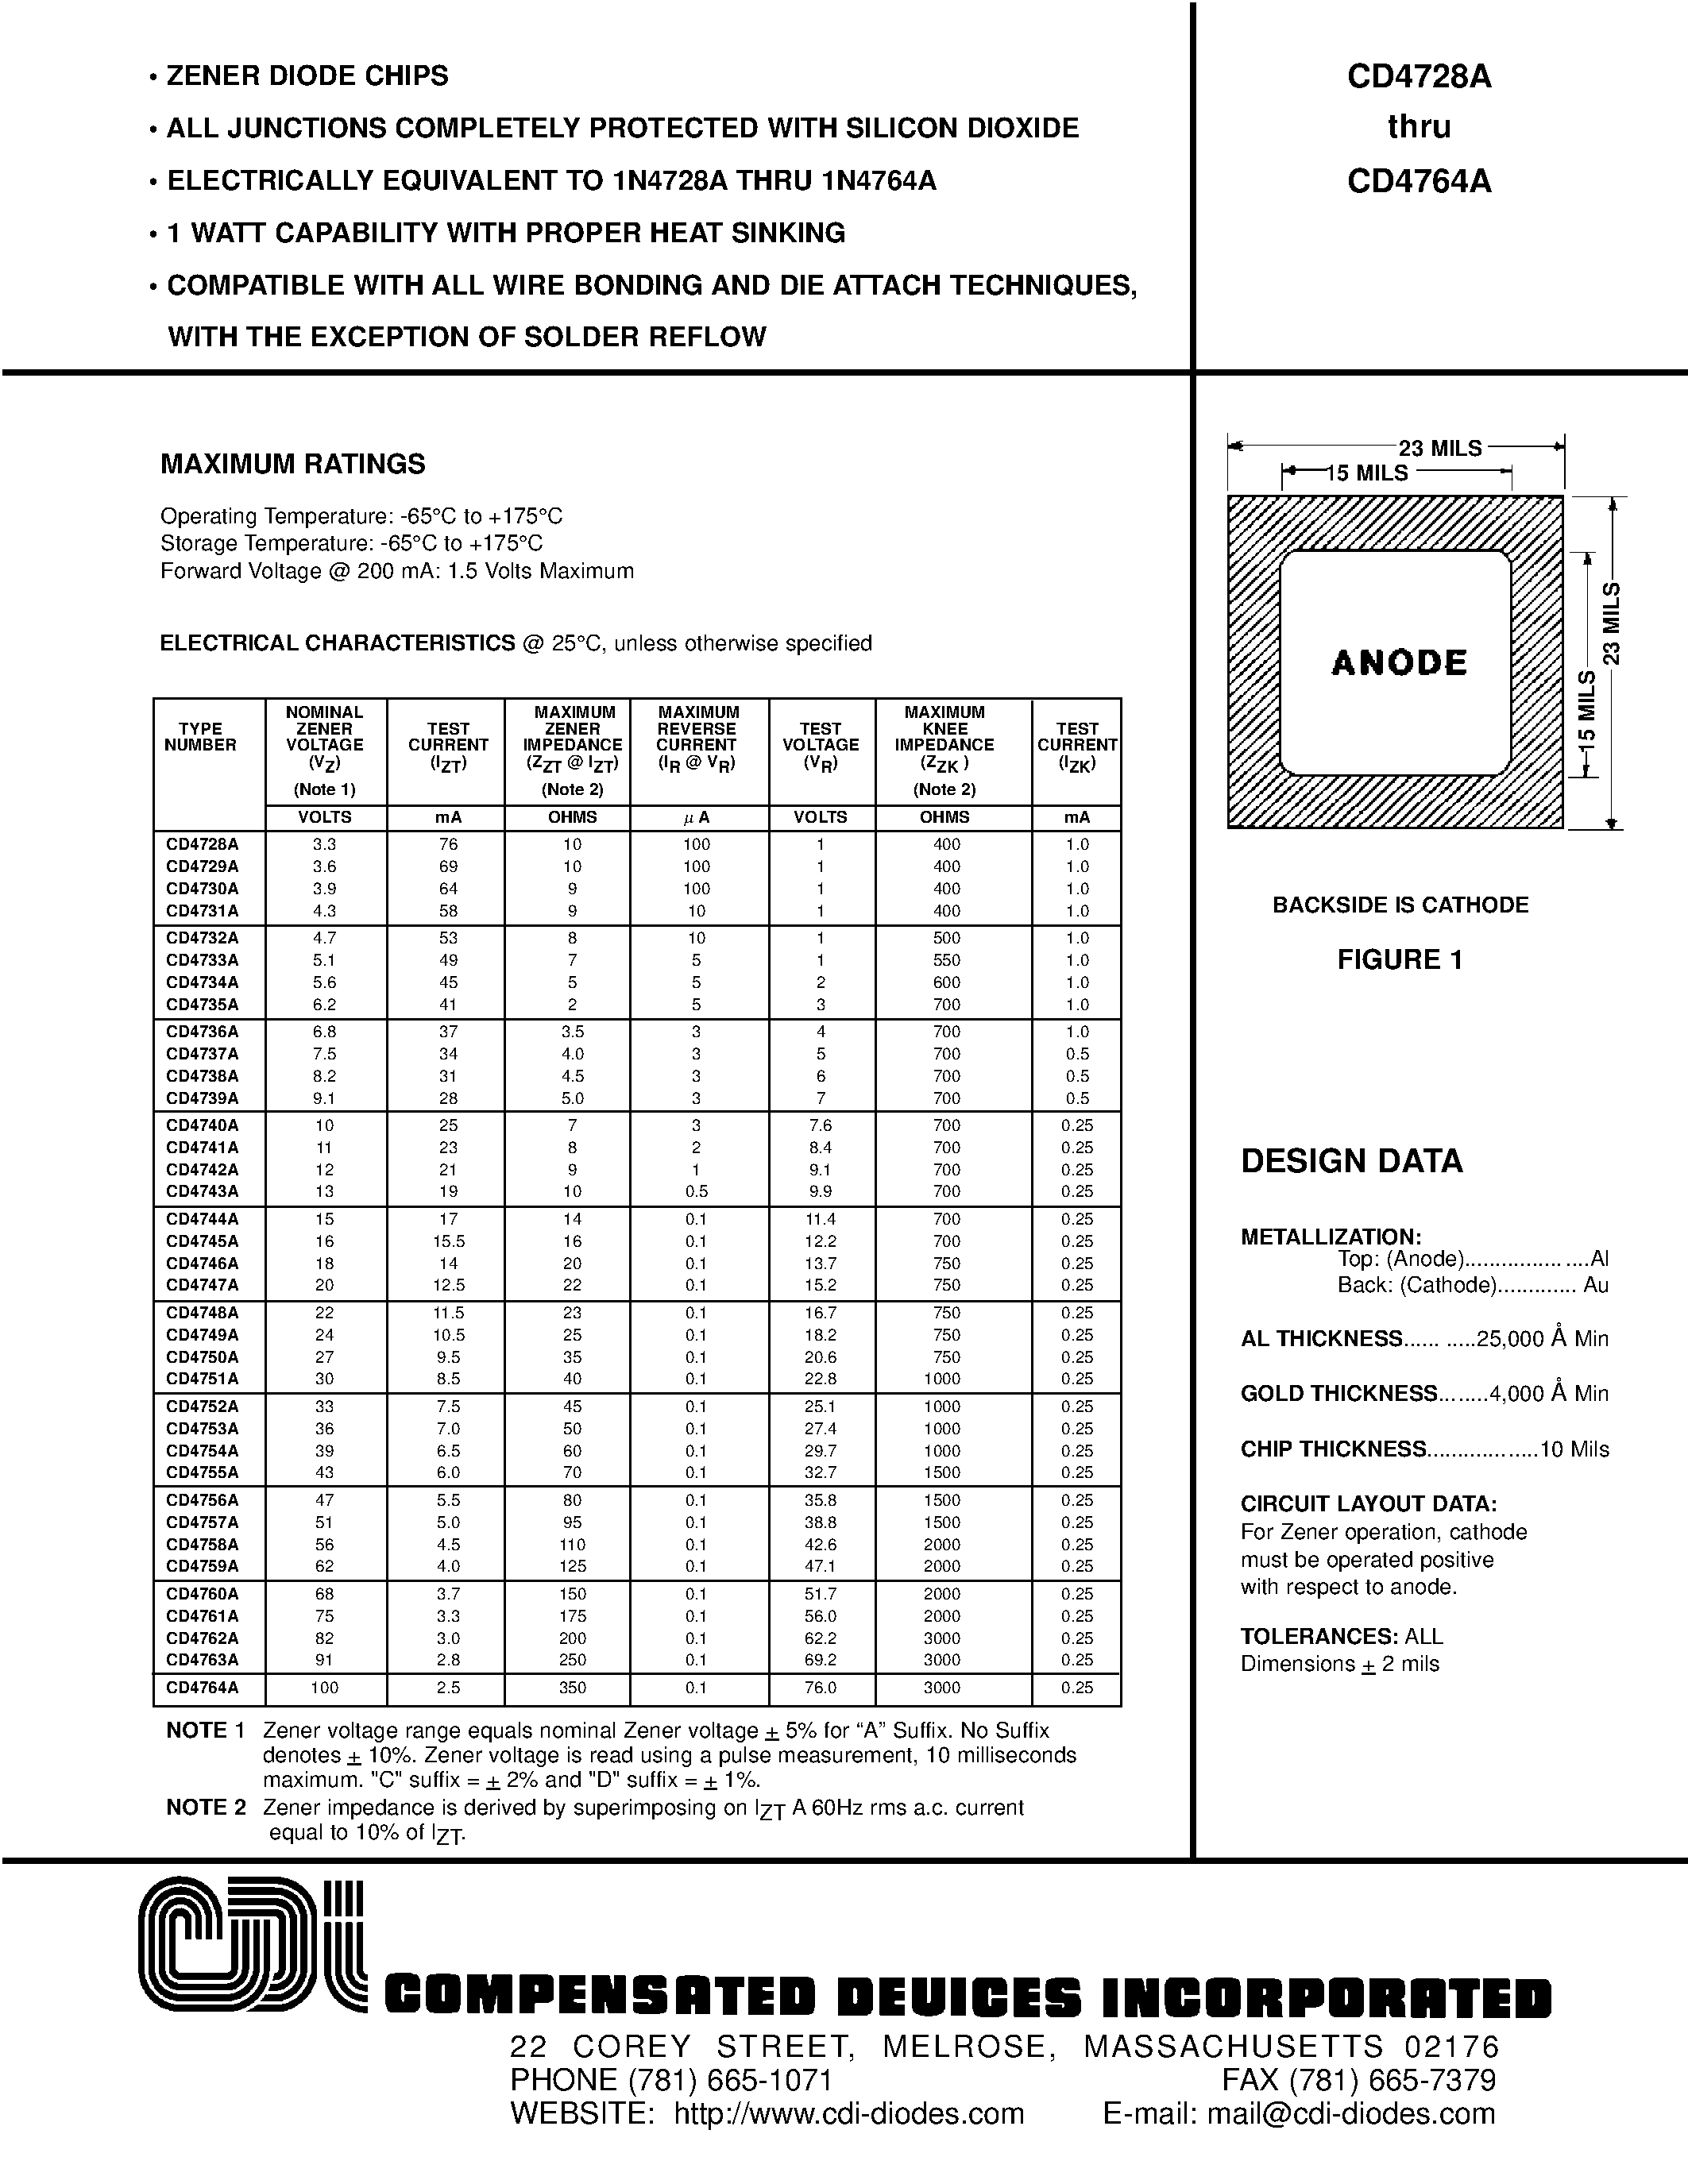 Datasheet CD4756A - ZENER DIODE CHIPS page 1